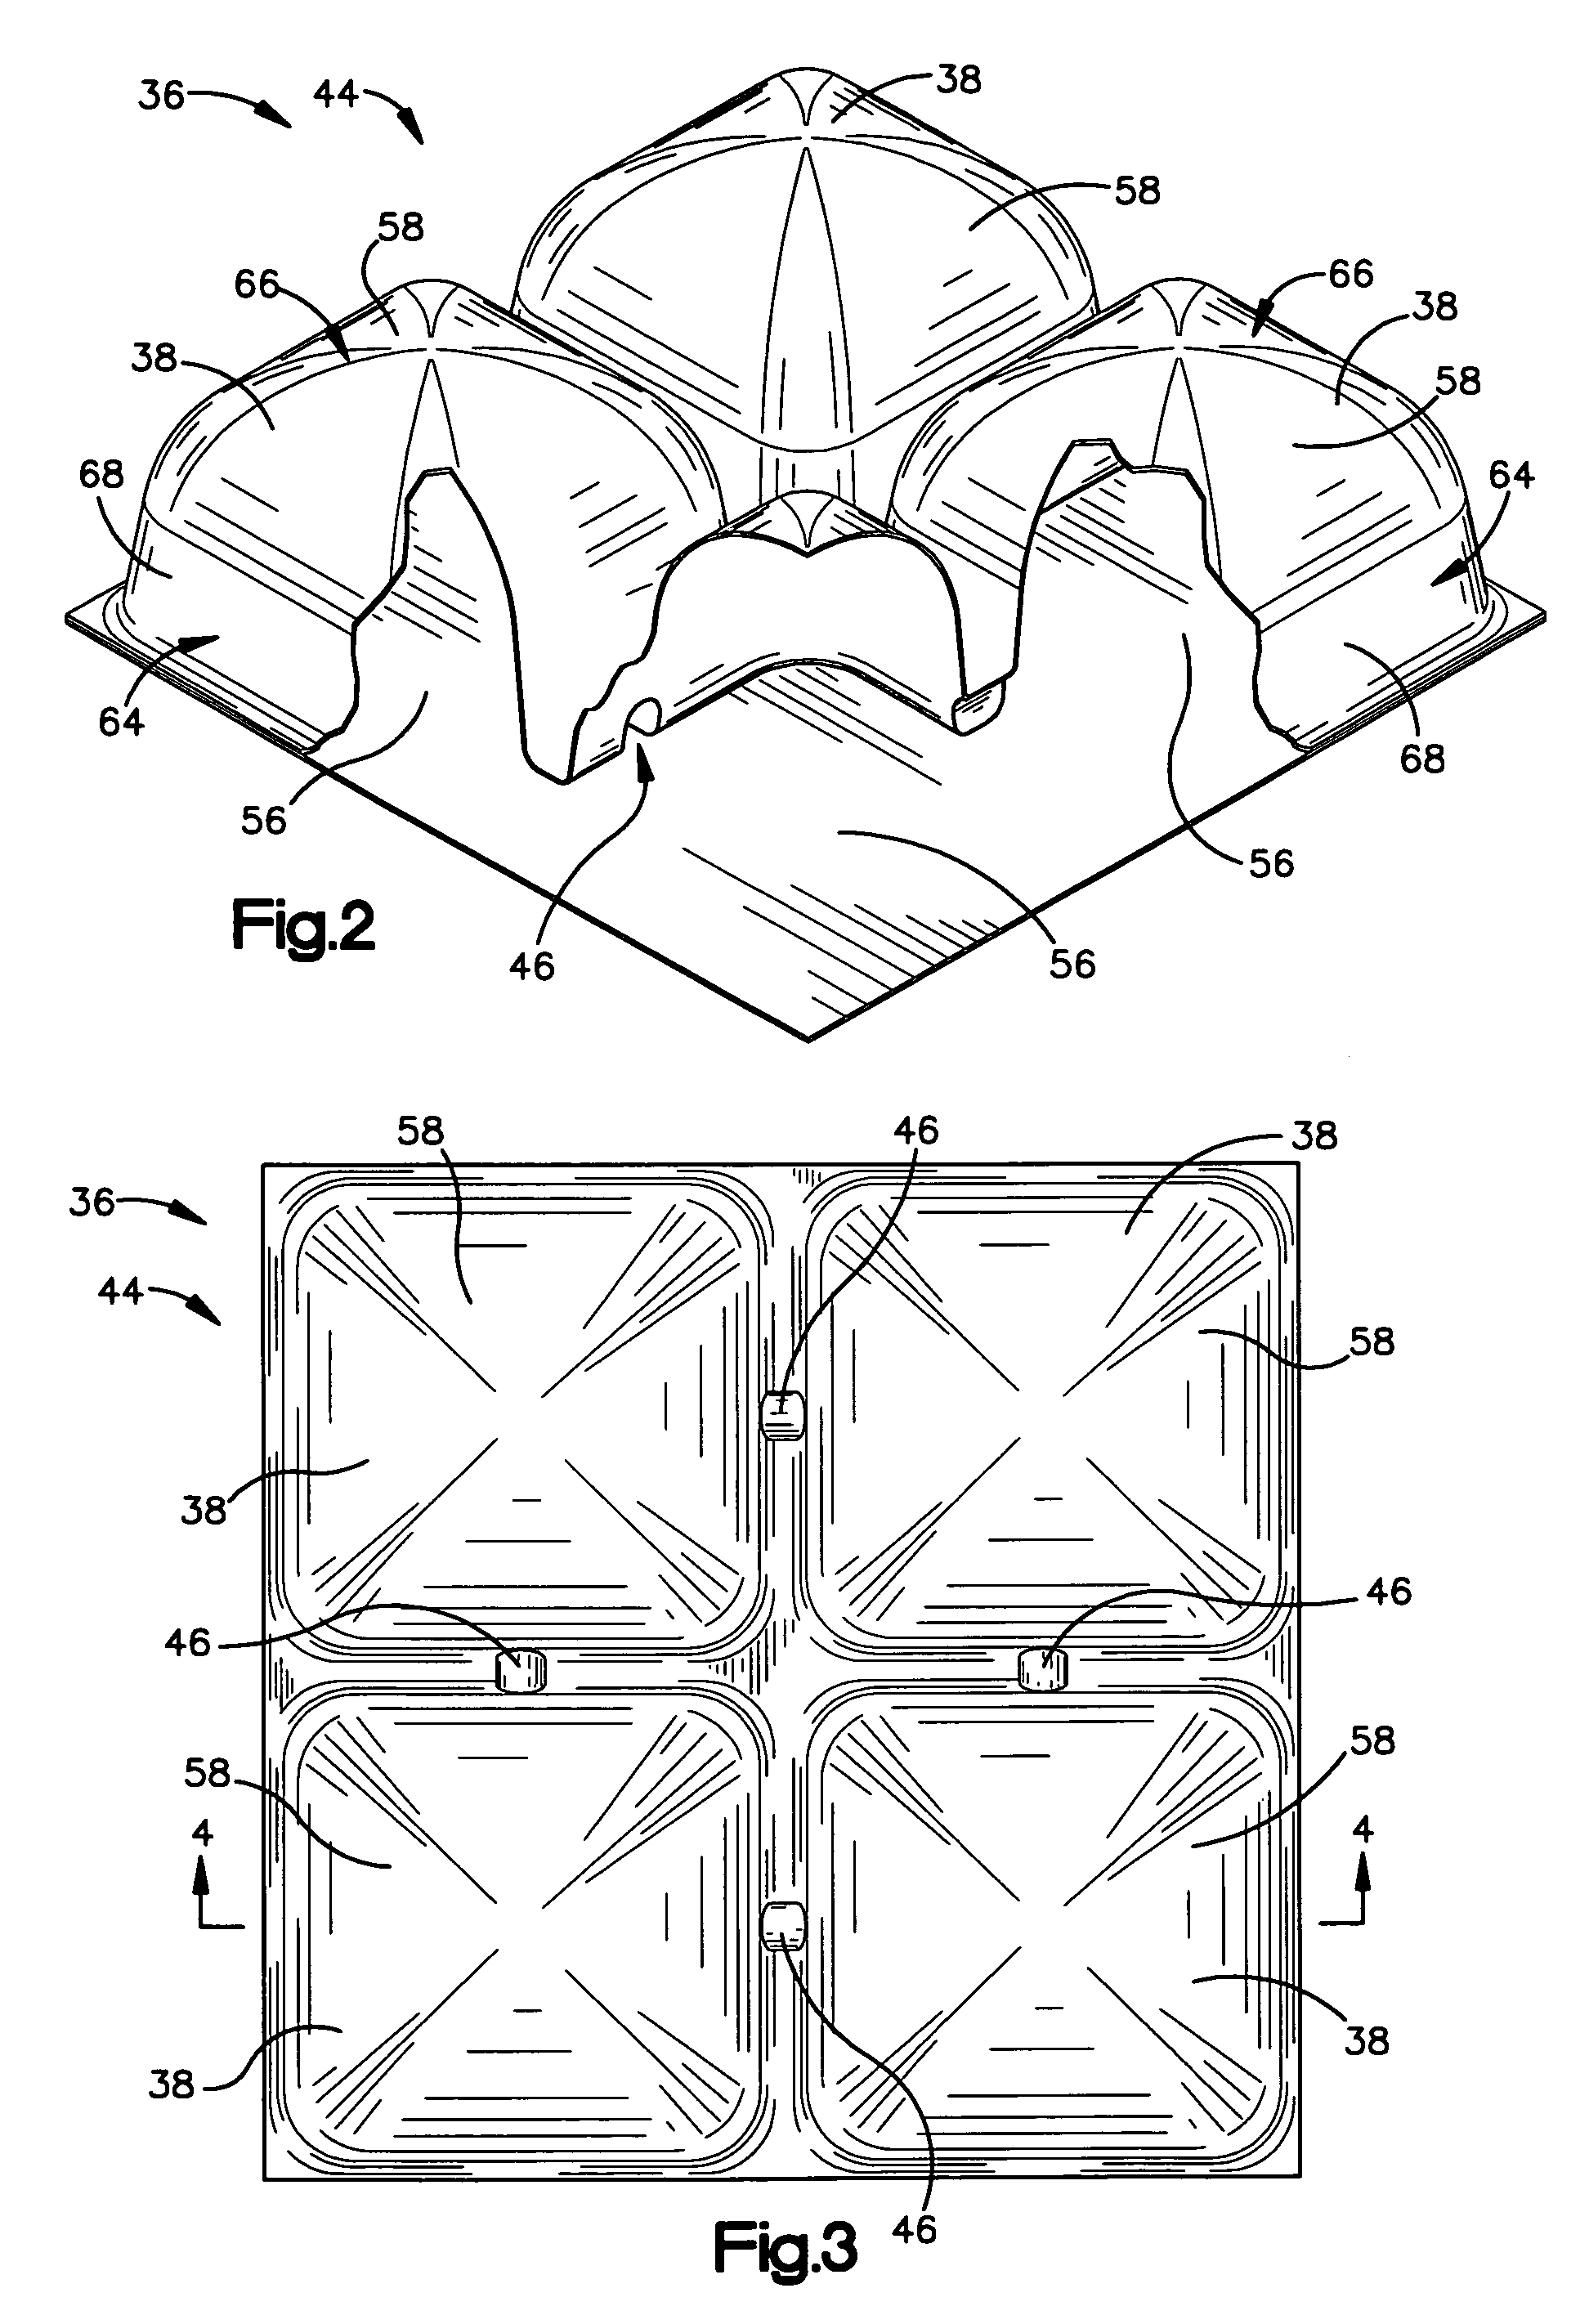 Patient support apparatus having an air cell grid and associated method